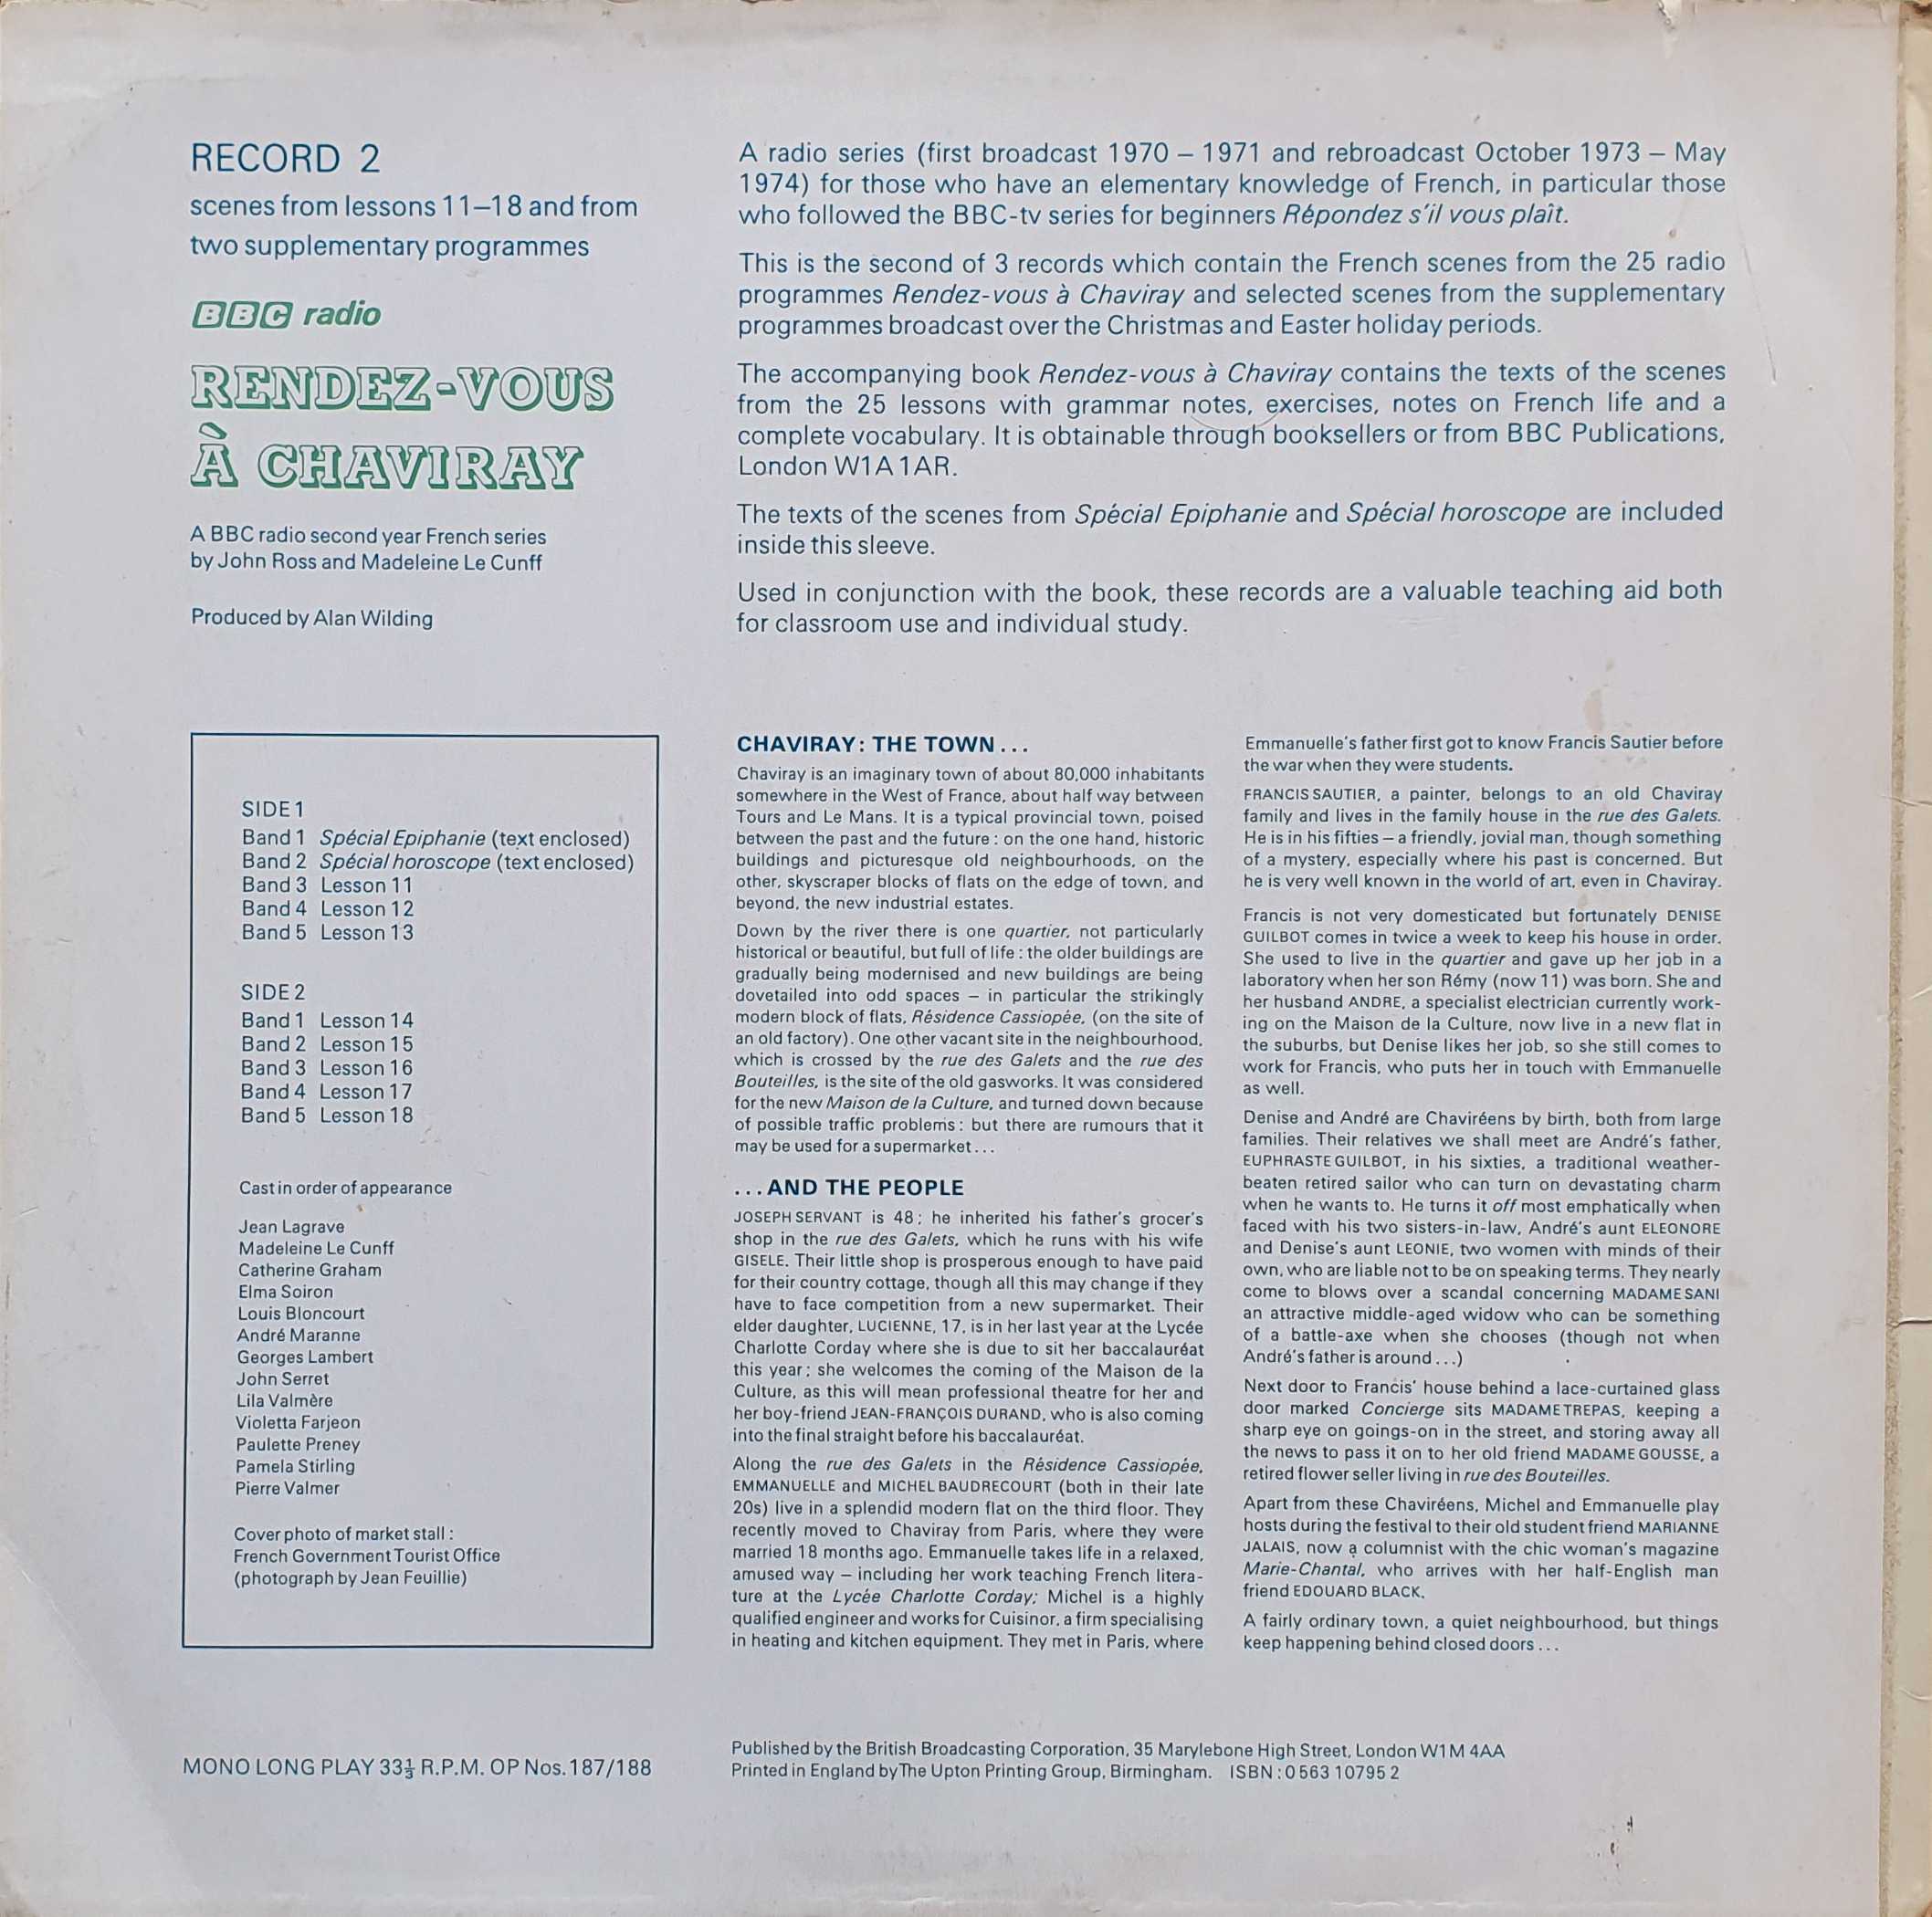 Picture of OP 187/188 Rendez-vous a Chaviray - BBC radio Second Year French - Record 2 - Lessons 19 - 20 by artist John Ross / Madeleine Le Cunff from the BBC records and Tapes library